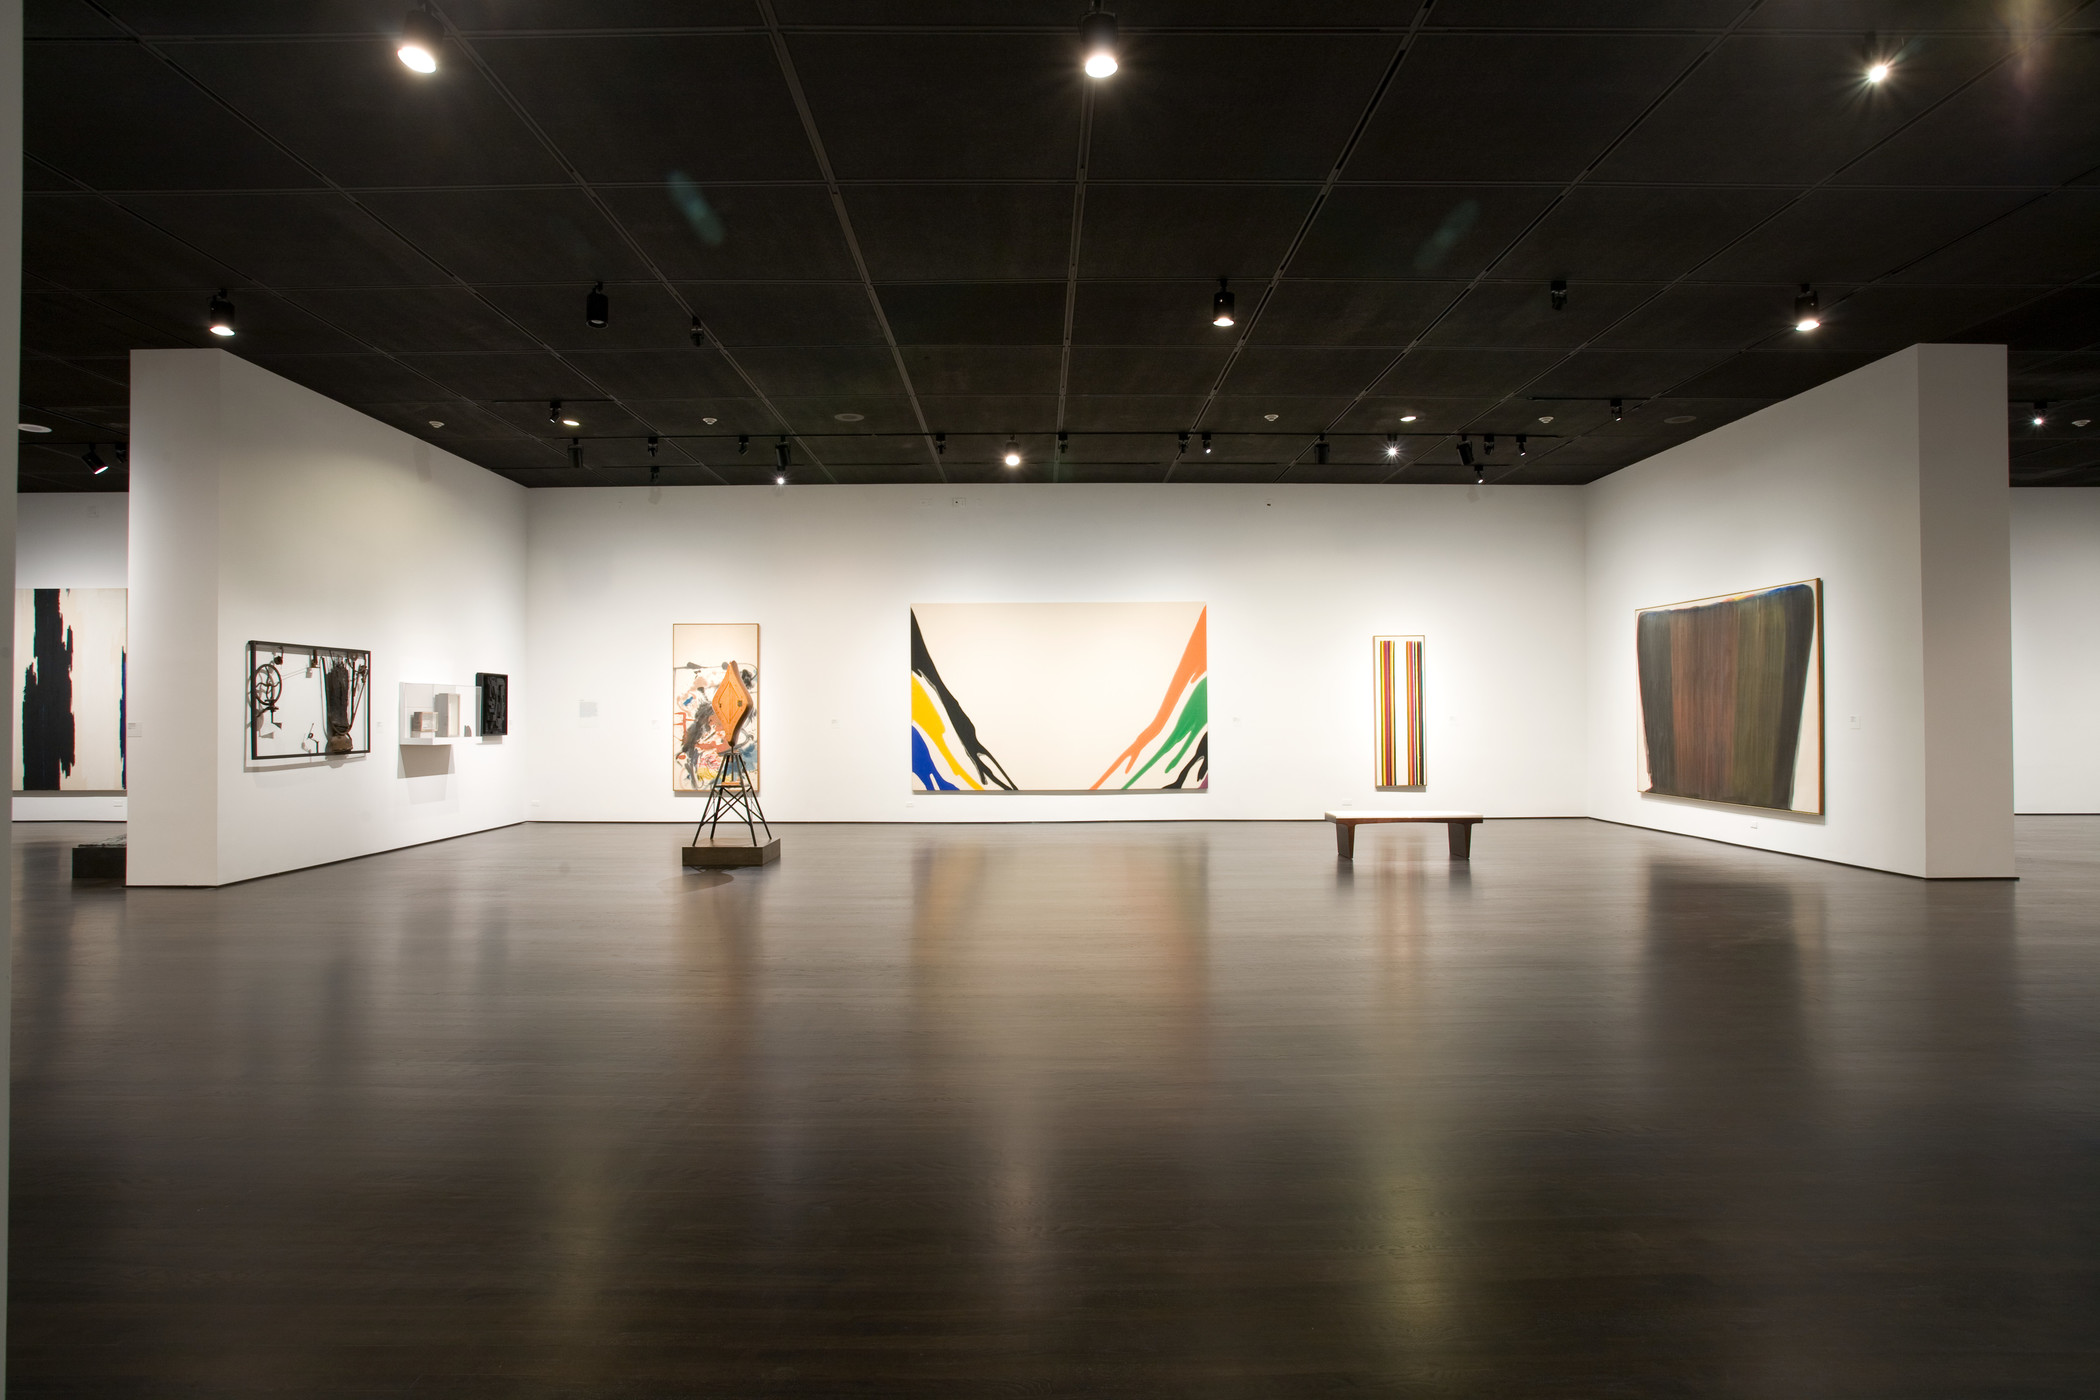 Gallery with paintings and sculpture